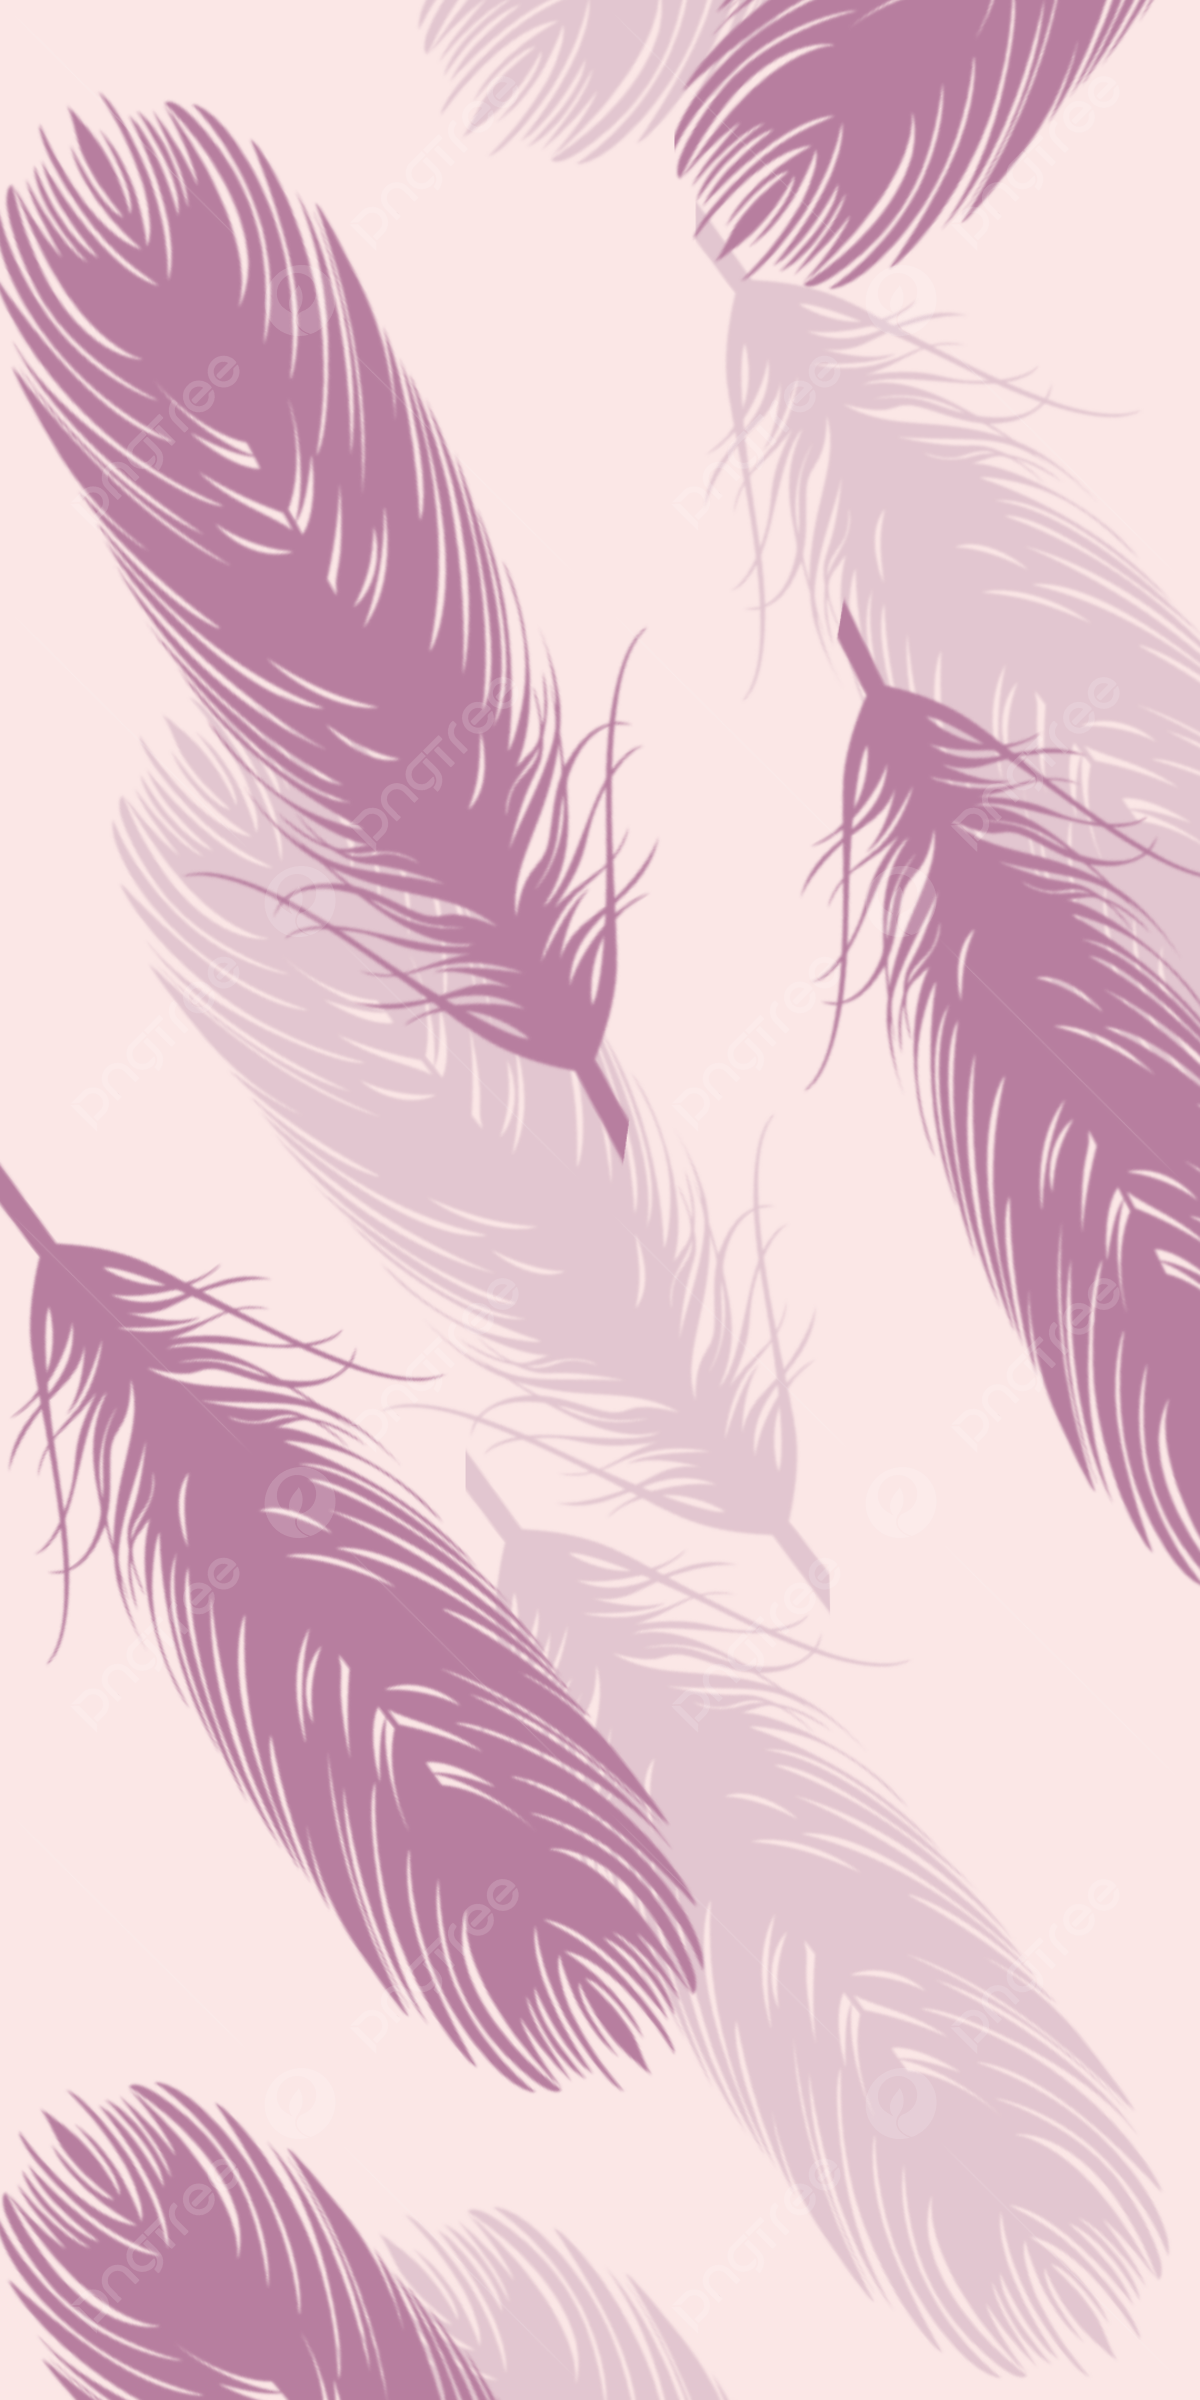 Purple feathers on a pink background - Feathers